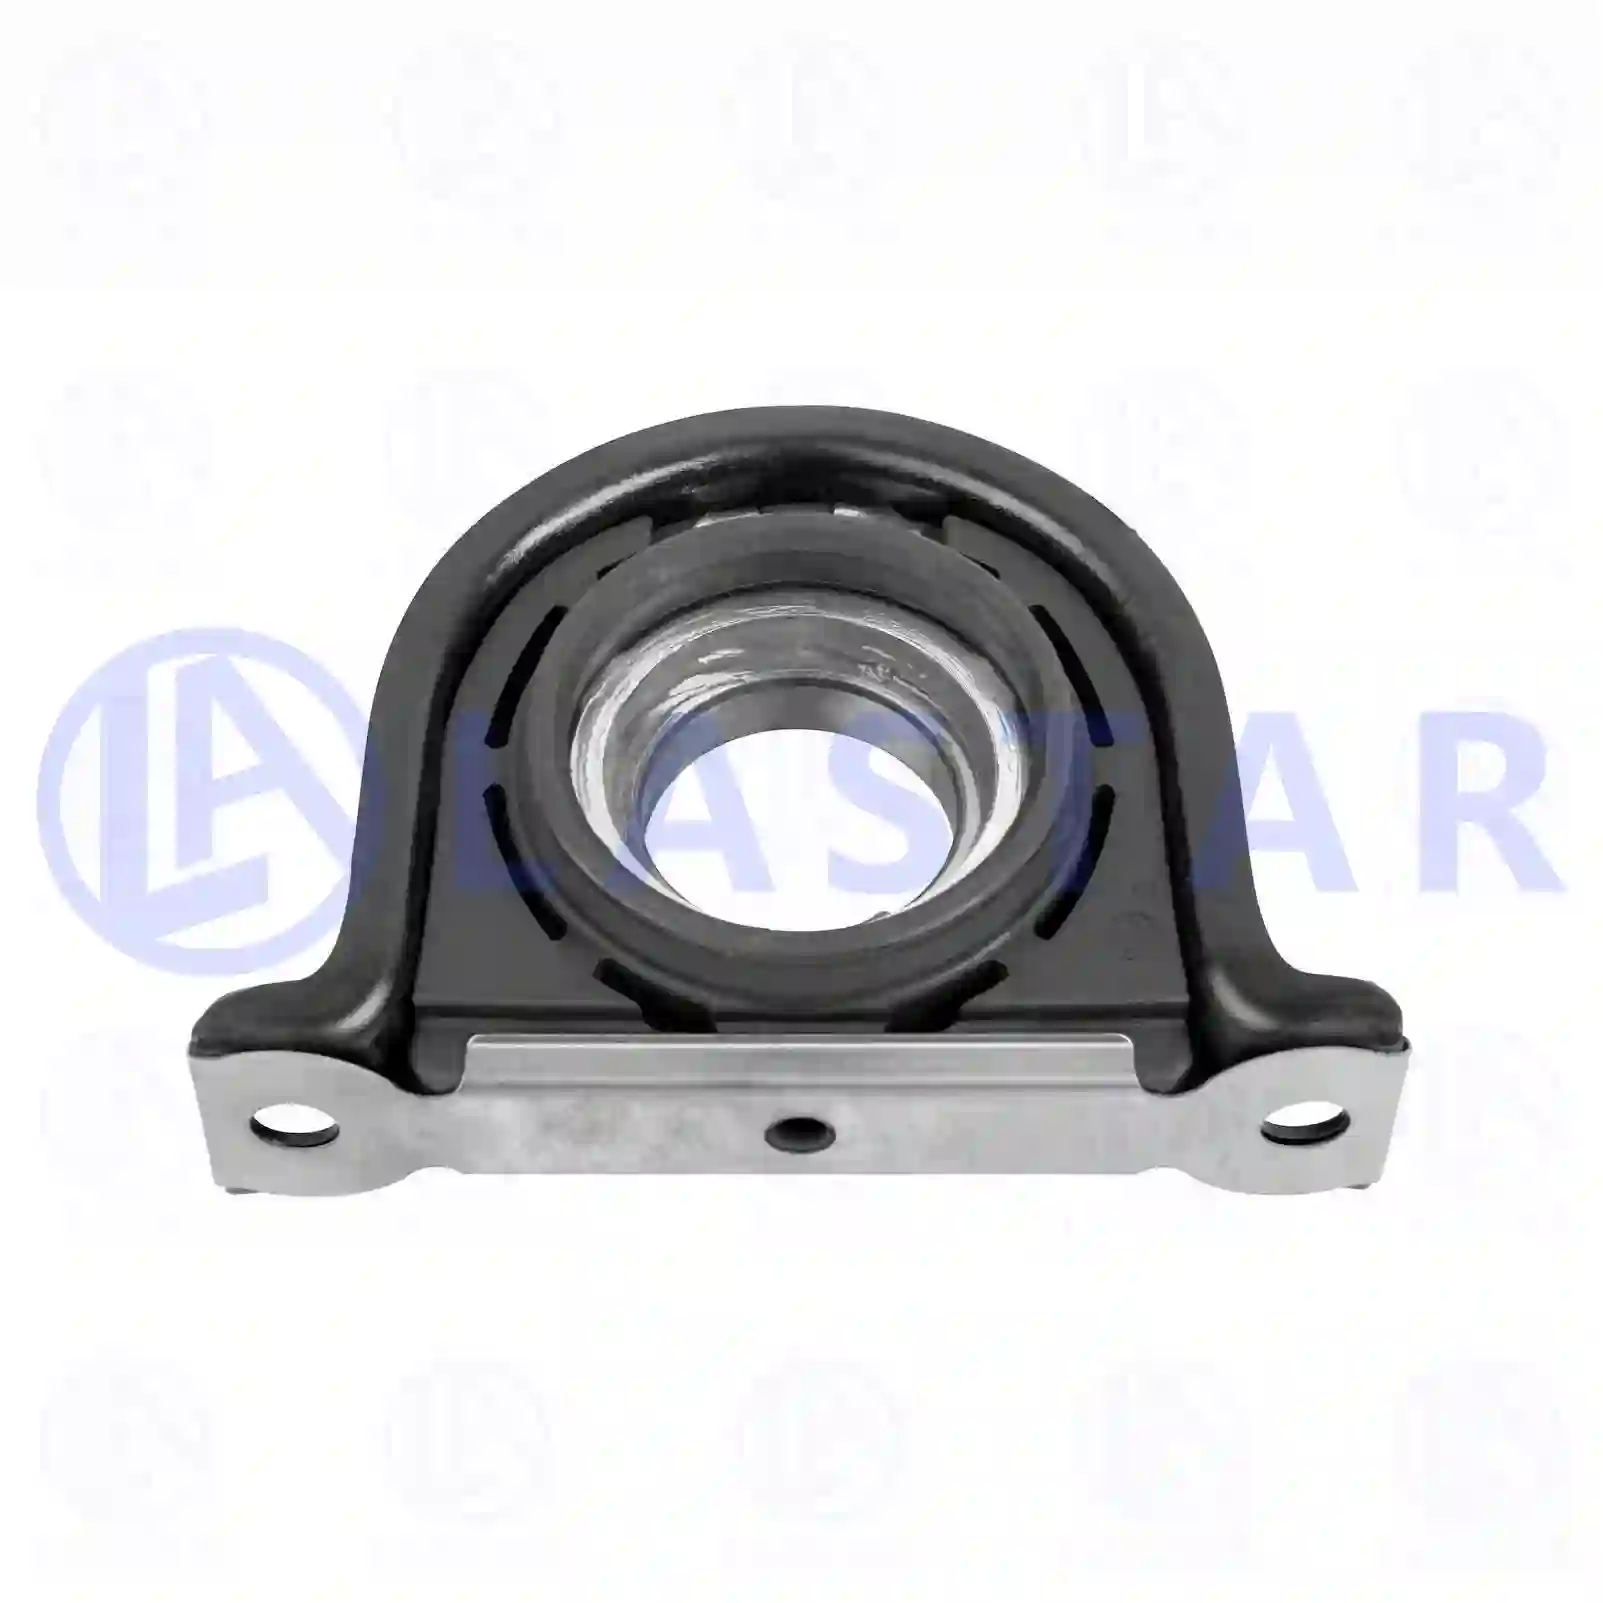 Center bearing, 77734353, 42532291, 4253836 ||  77734353 Lastar Spare Part | Truck Spare Parts, Auotomotive Spare Parts Center bearing, 77734353, 42532291, 4253836 ||  77734353 Lastar Spare Part | Truck Spare Parts, Auotomotive Spare Parts